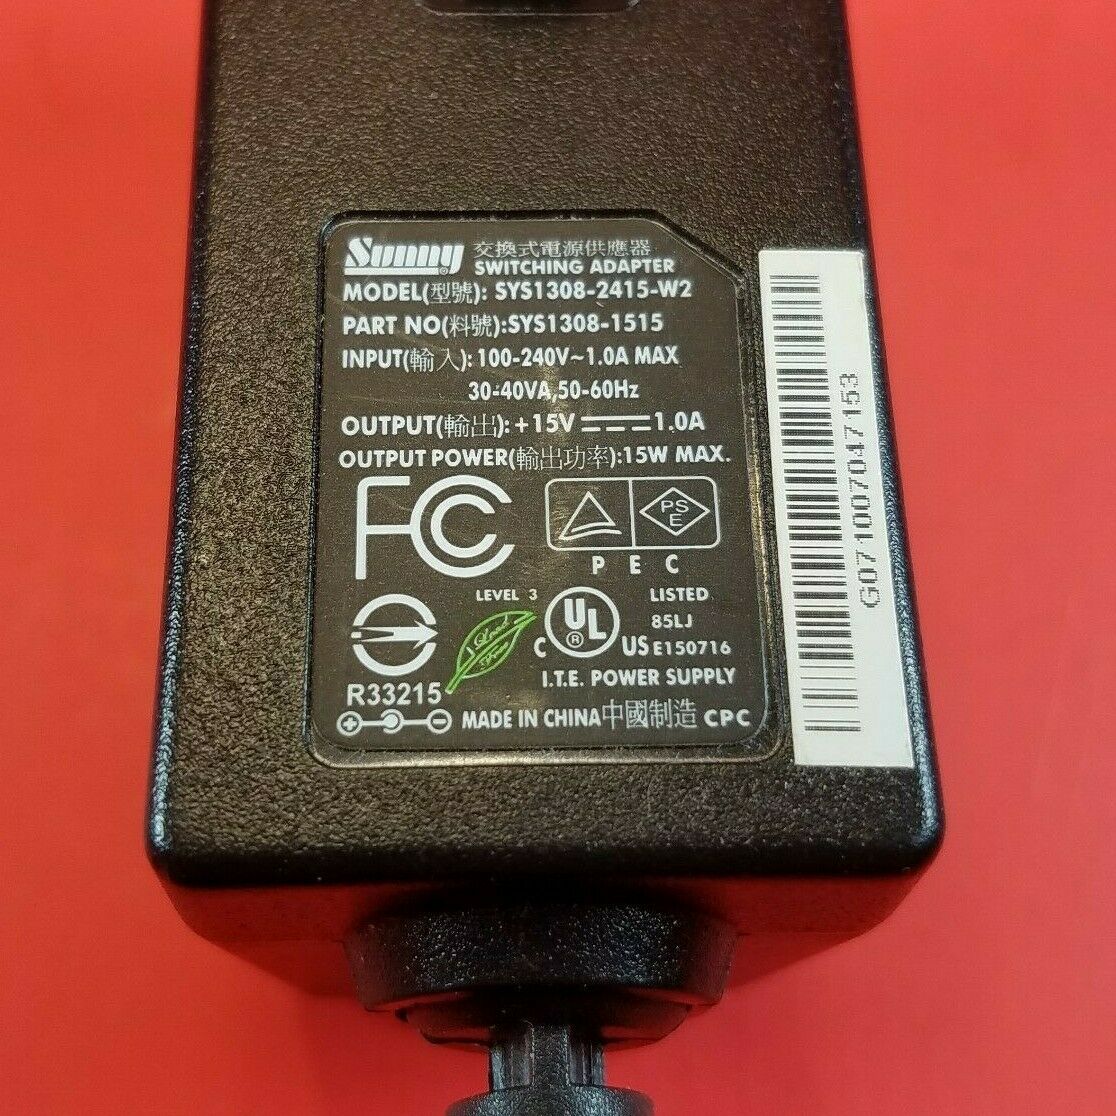 Genuine SUNNY +15V - 1A Switching Adapter Model SYS1308-2415-W2 OEM Power Supply Type: Adapter Features: Powered MPN